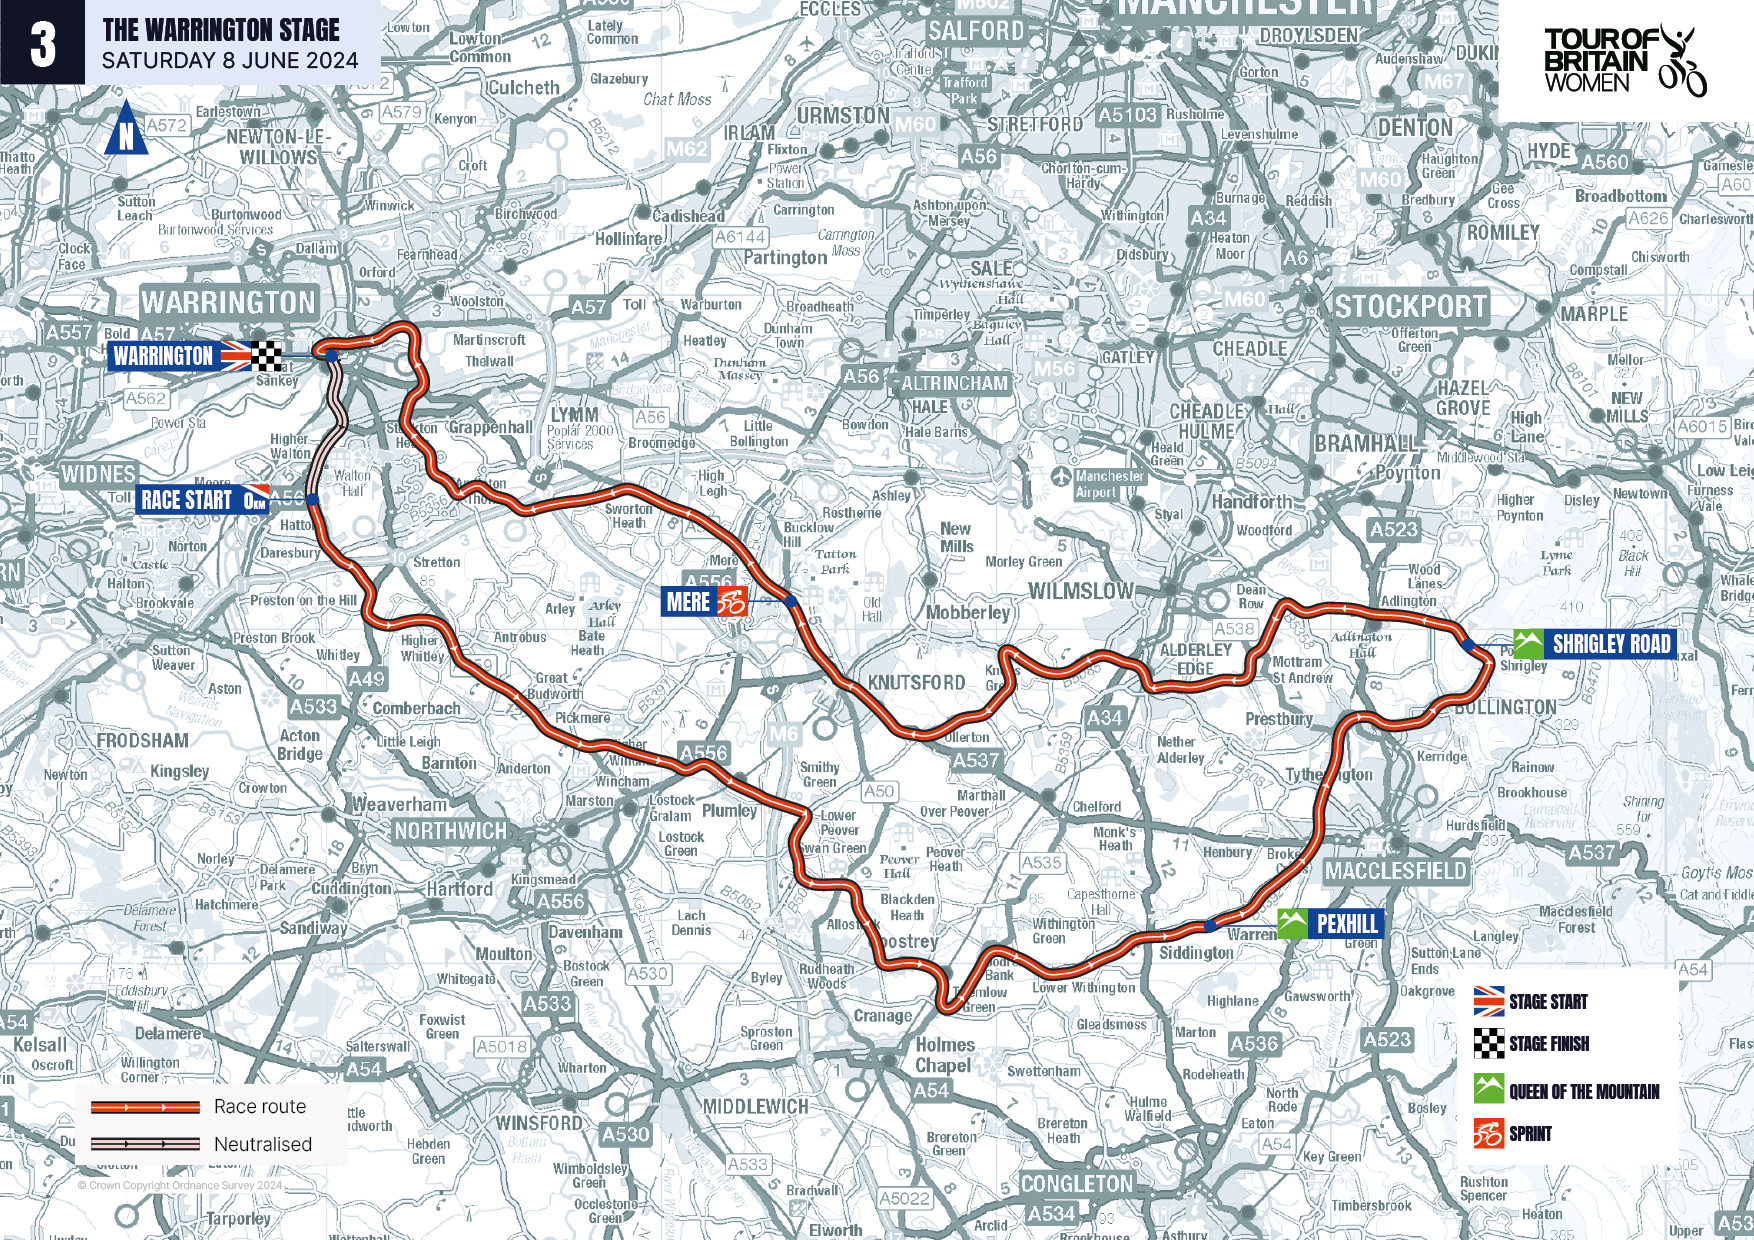 An illustration of the Tour of Britain Women stage 3 route map which starts and ends at the Golden Gates